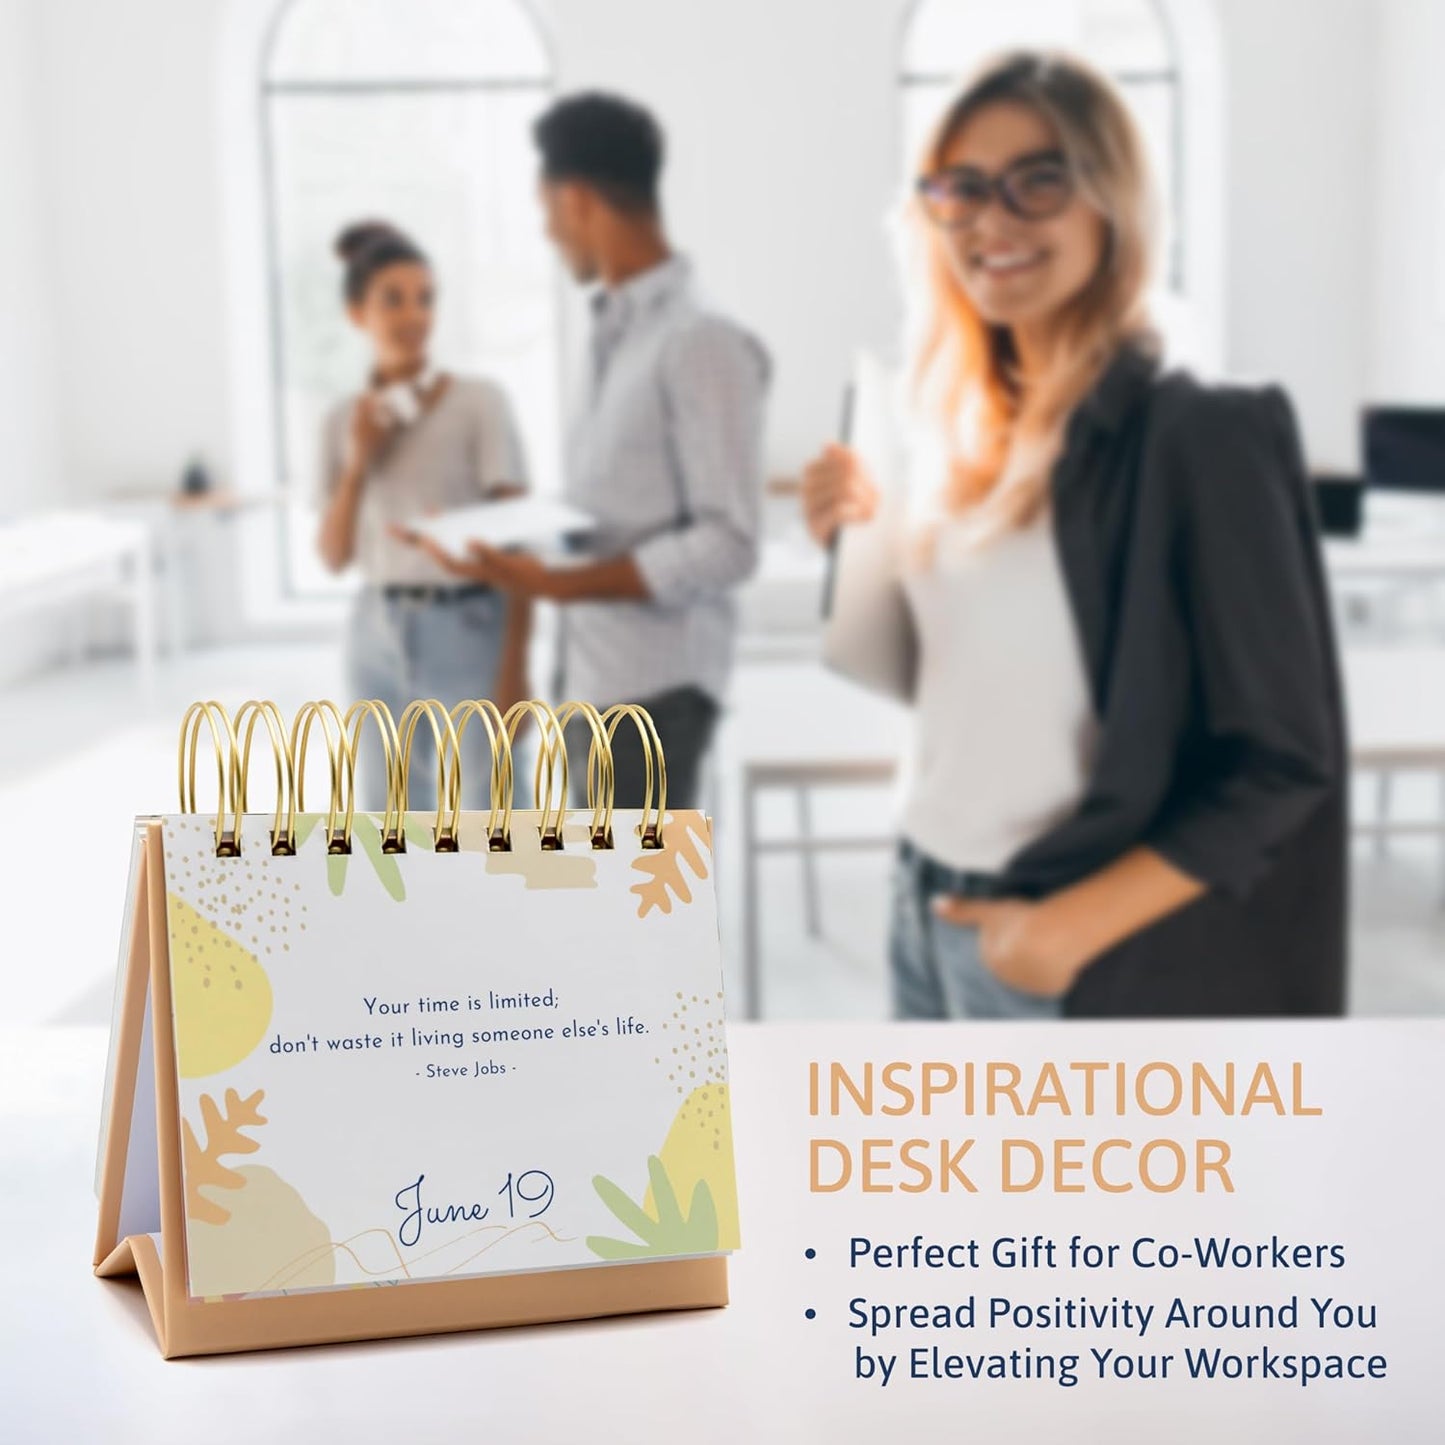 Motivational Desk Calendar - Perpetual Daily Flip Calendar with Daily Motivational Quotes for Desk - Inspirational Gifts for Women, Gifts for Coworkers Female, Inspirational Desk Decor